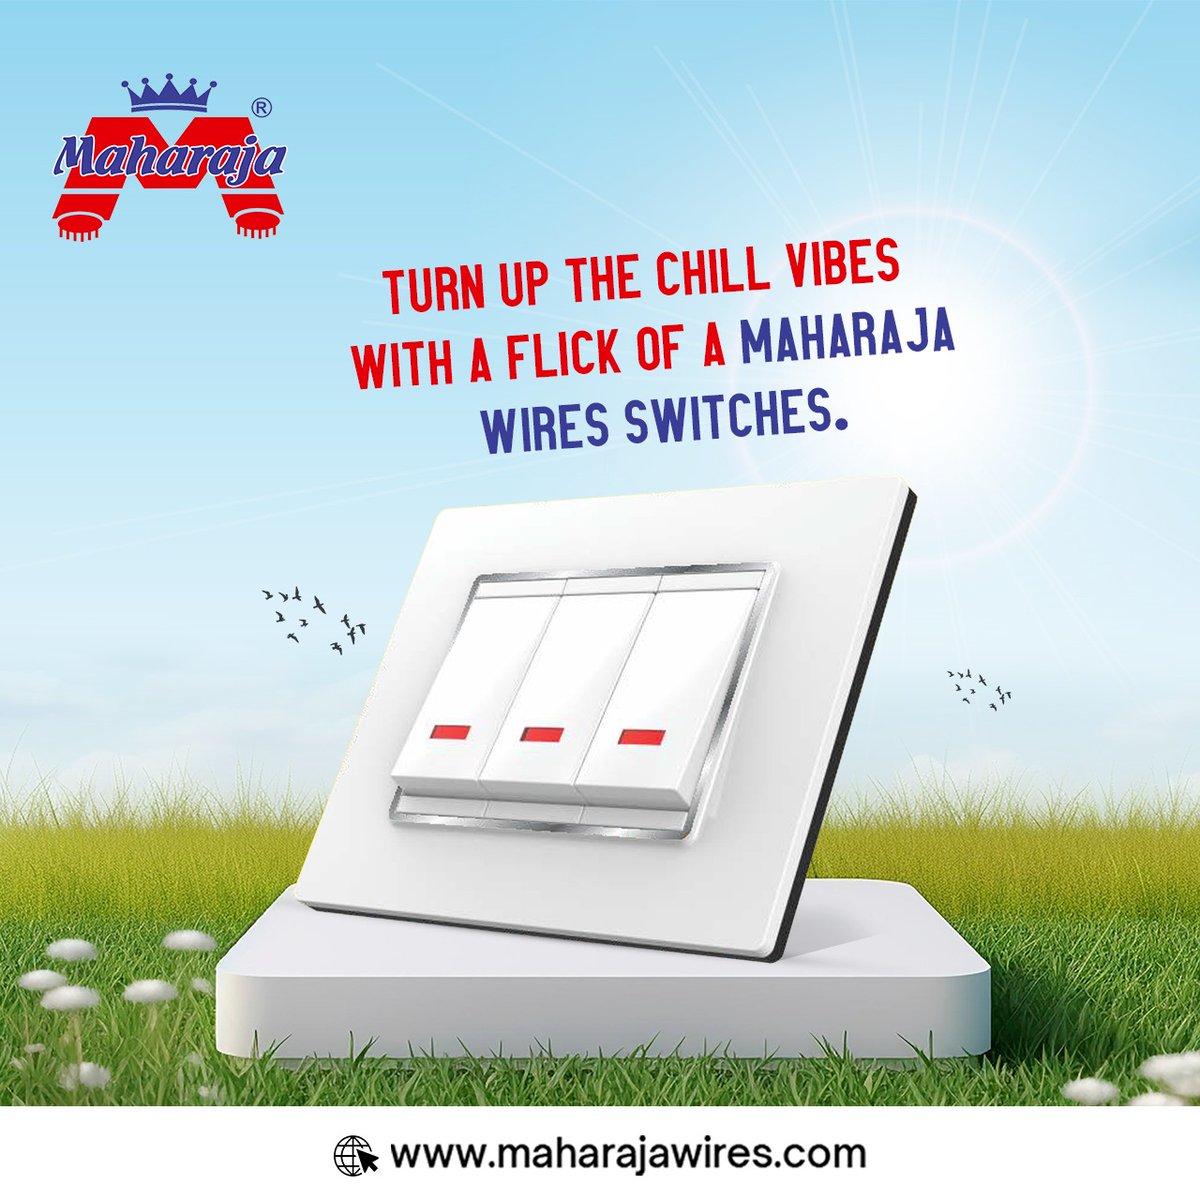 Switch to relaxation mode effortlessly with Maharaja Wires switches. Chill vibes await!

Visit our website: maharajawires.com
.

.
#MaharajaWires #SwitchToRelaxation #ChillVibes #EffortlessElegance #HomeDecor #LightingSolutions #summer